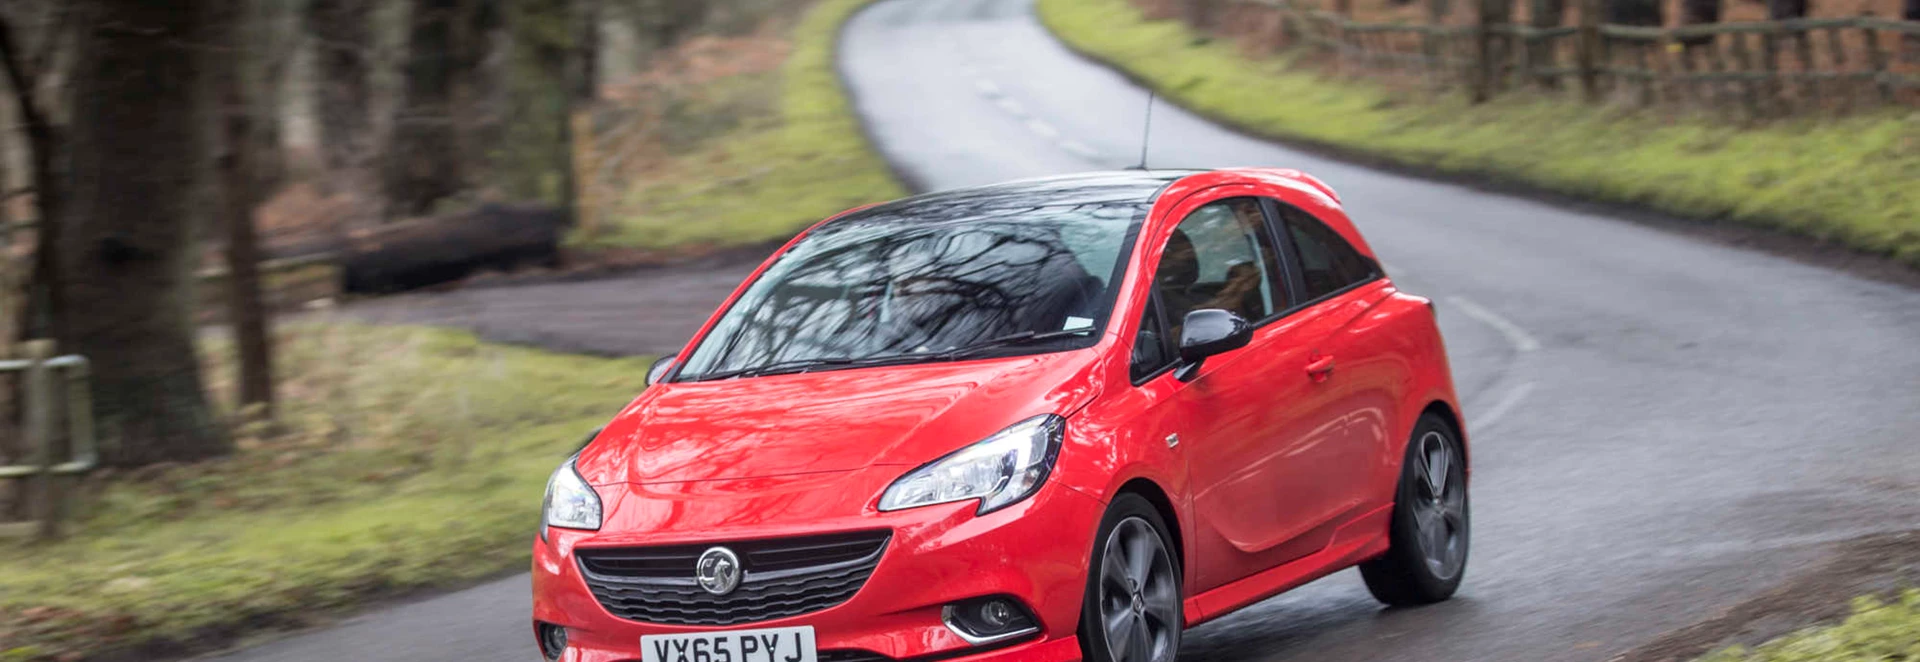 Vauxhall Corsa Red Edition 1.4-litre review 